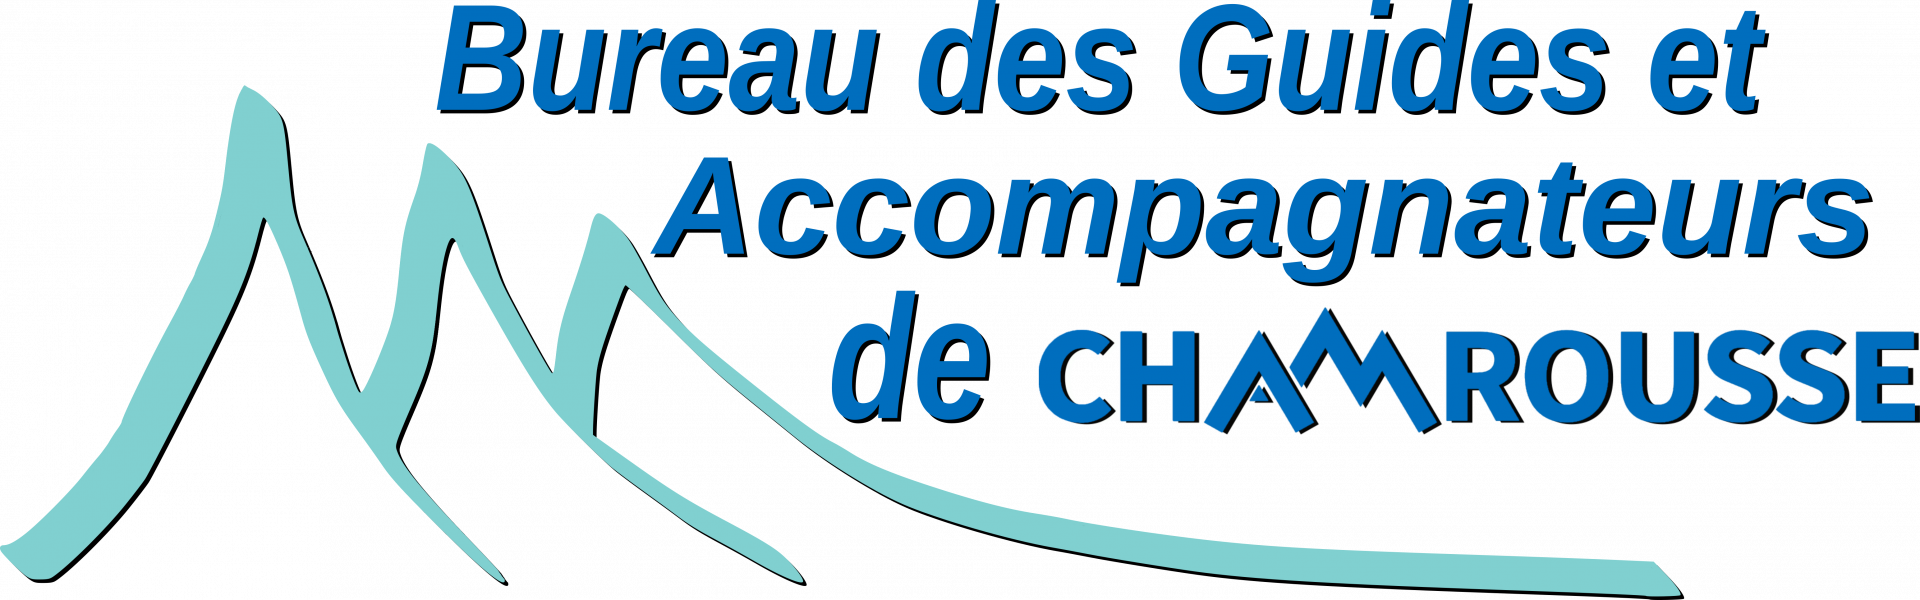 Chamrousse tour guides office logo